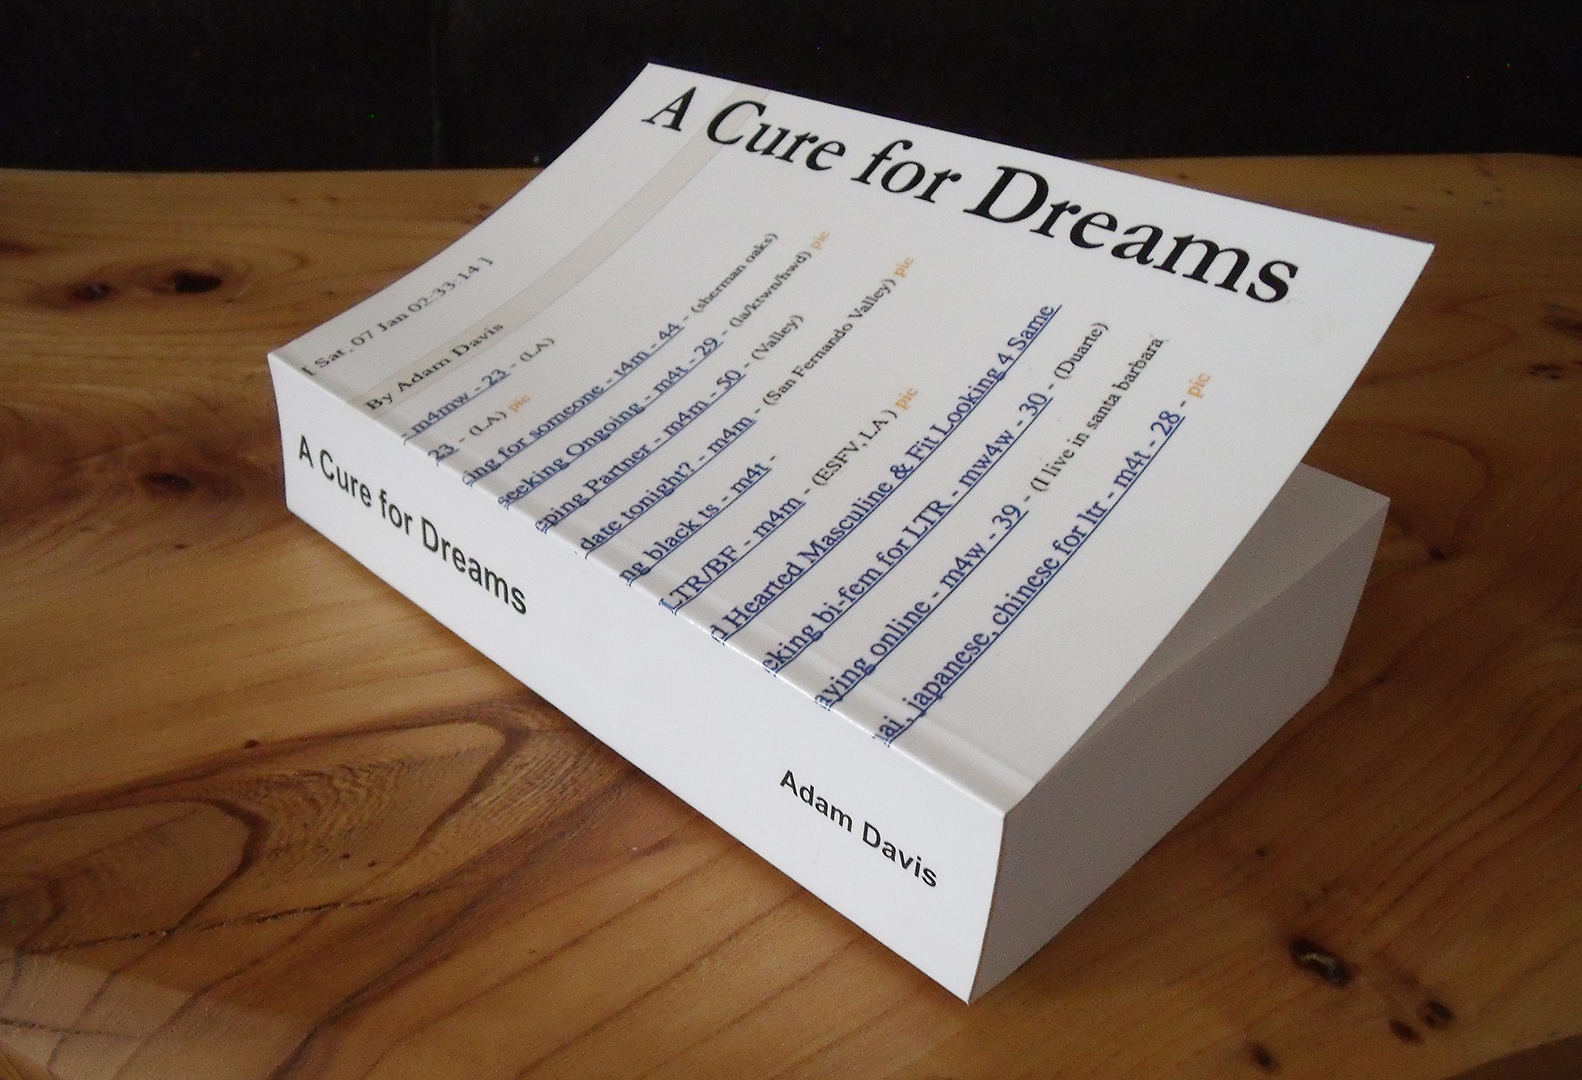 A Cure For Dreams Book.jpg